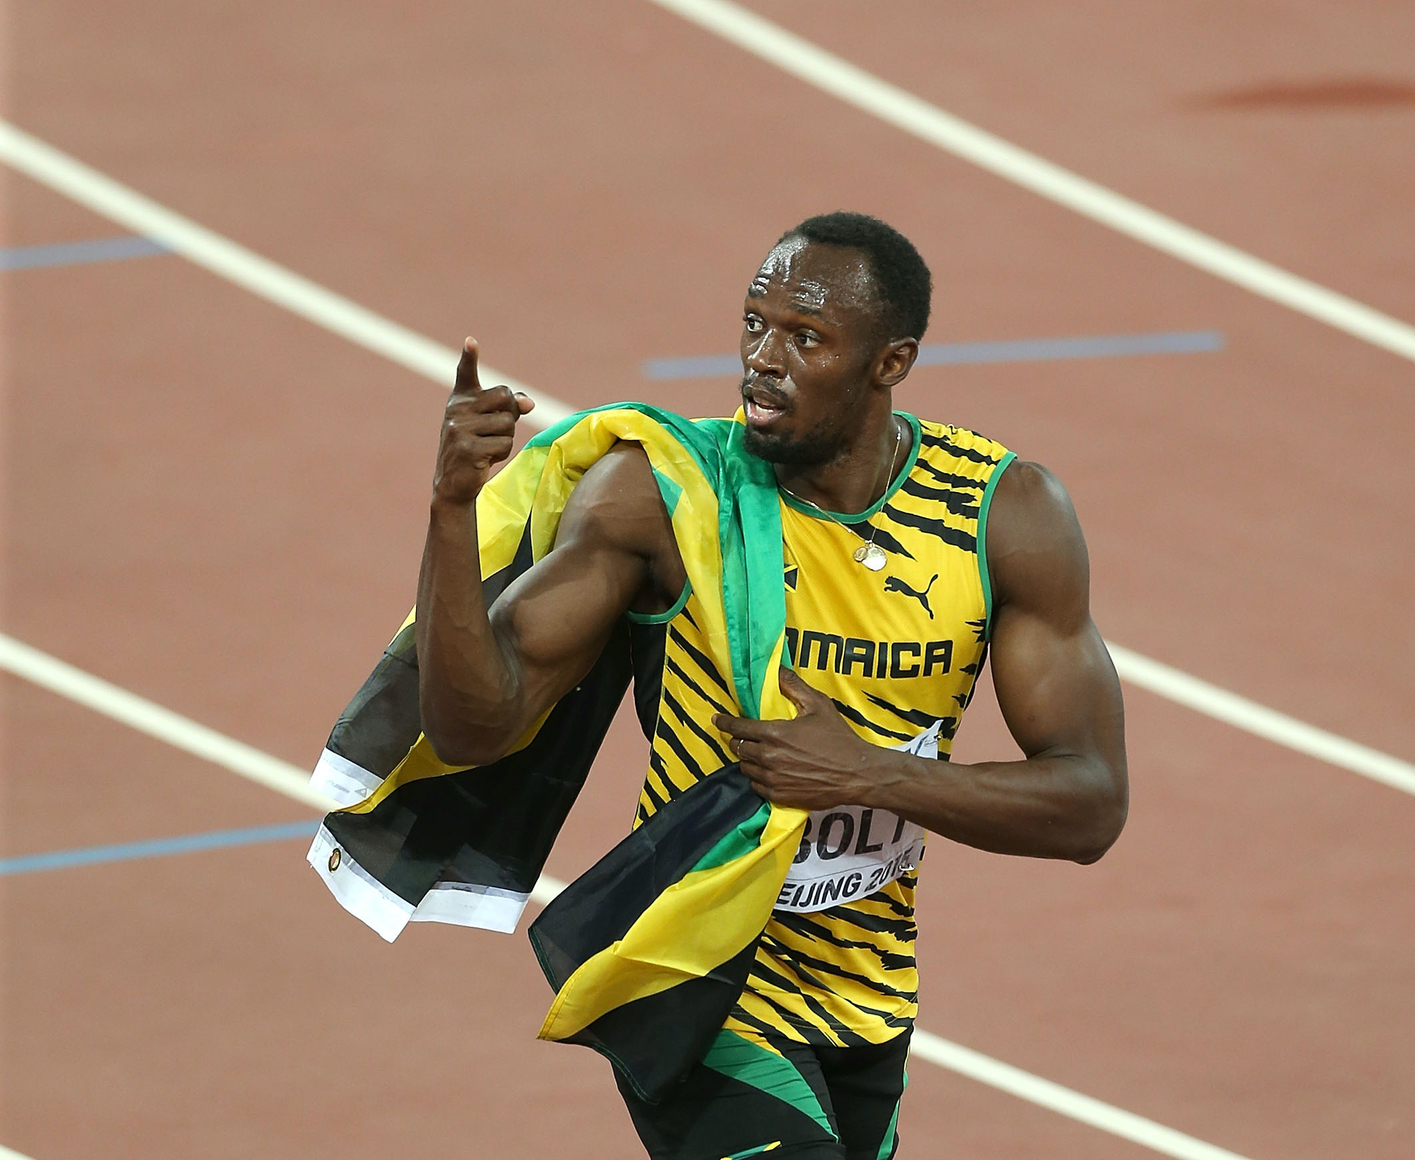 Usain-Bolt-Named-Greatest Male Athlete in Last 75 Years